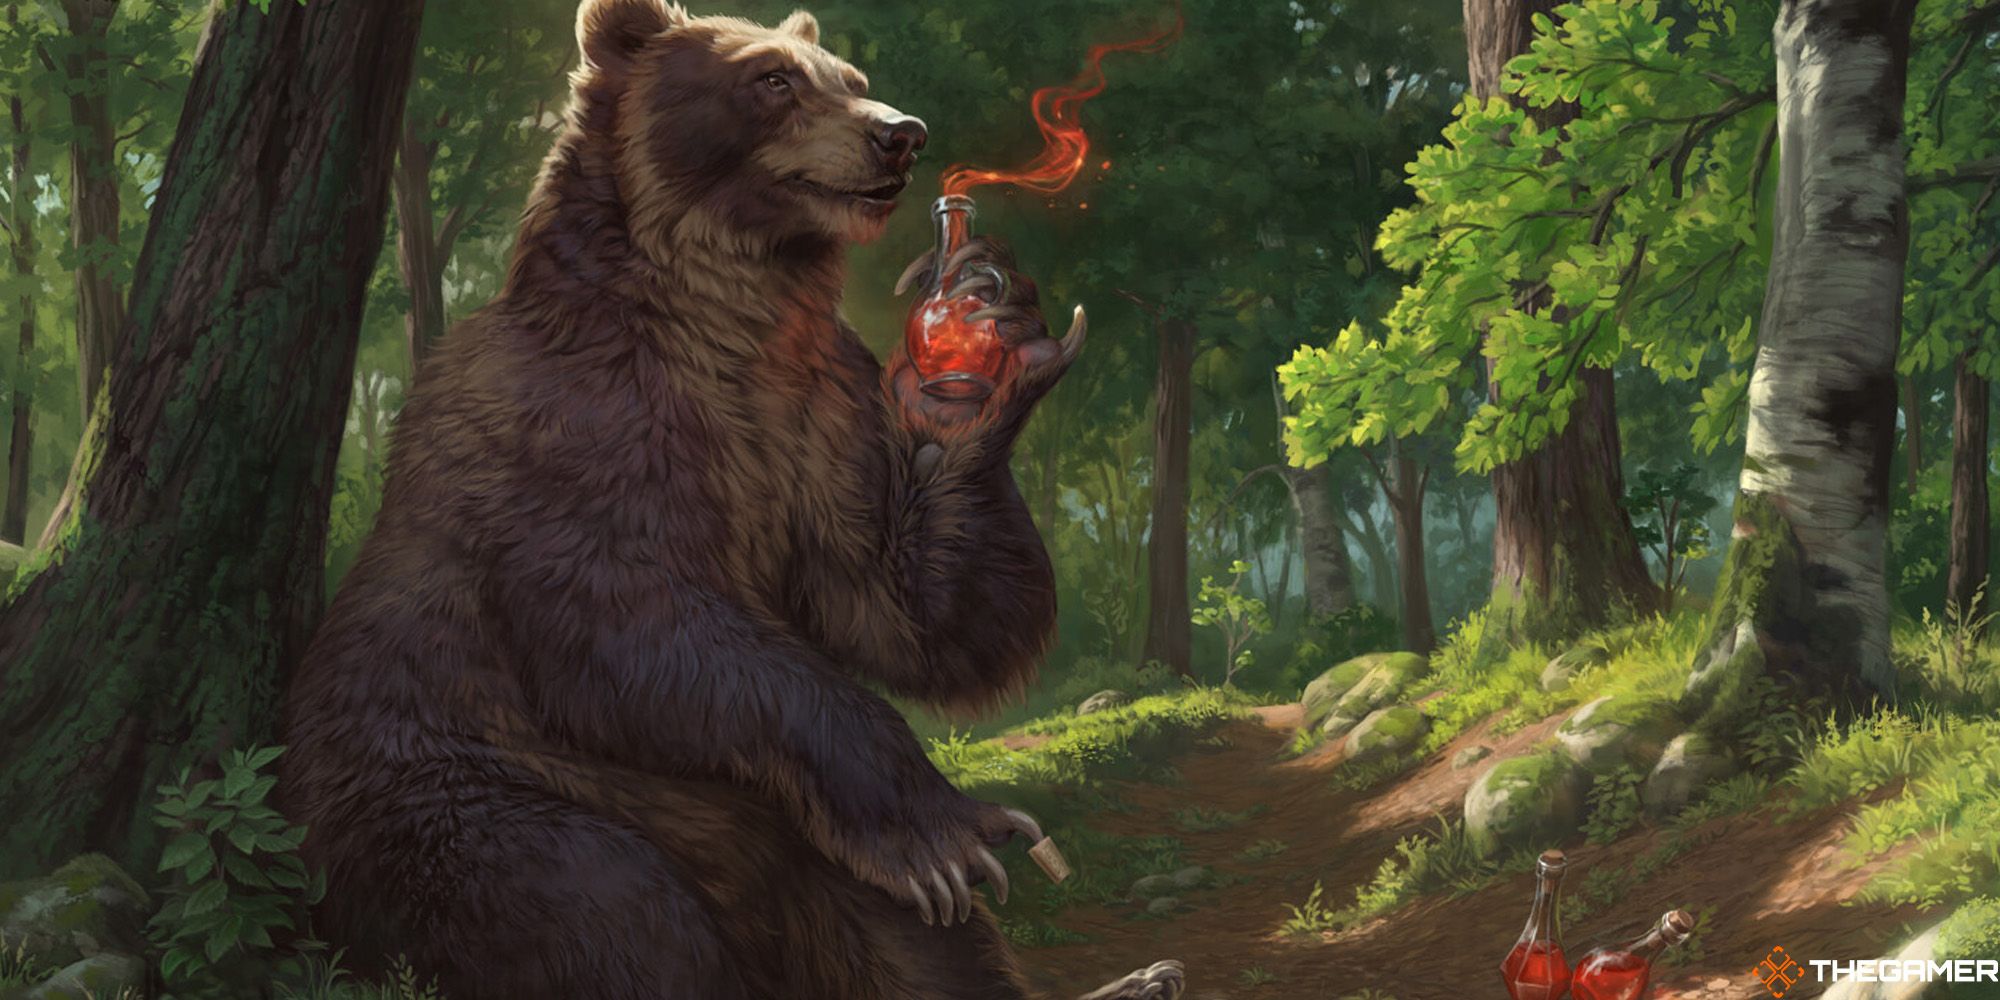 Wilson, Refined Grizzly by Ilse Gort